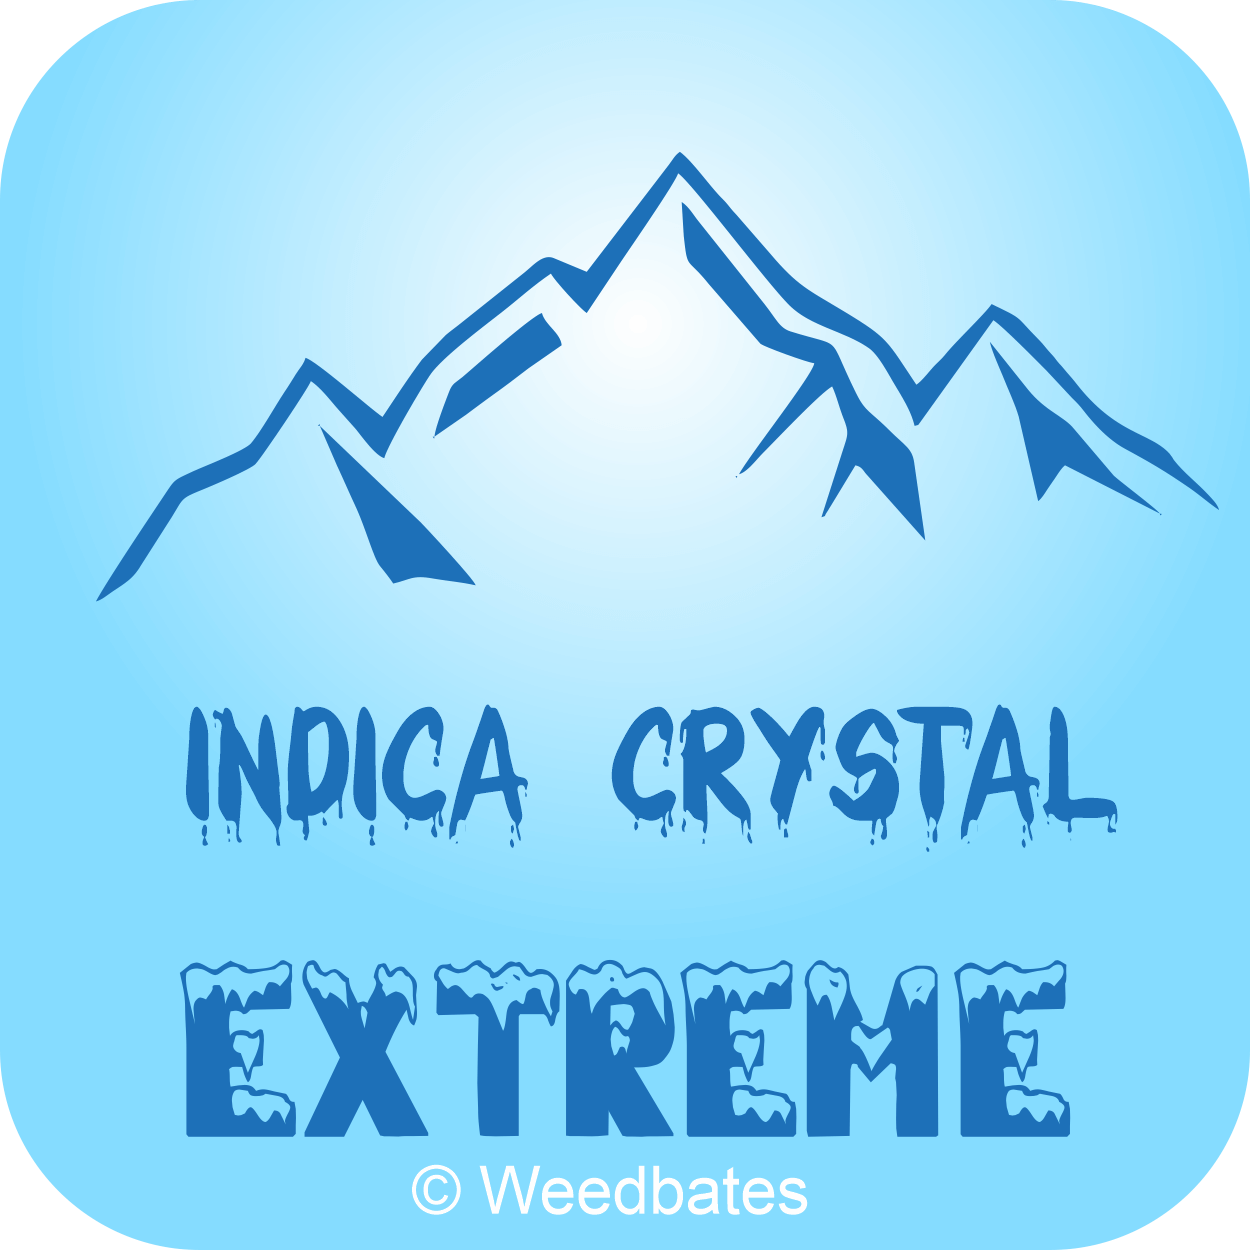 Indica Crystal Extreme cannabis